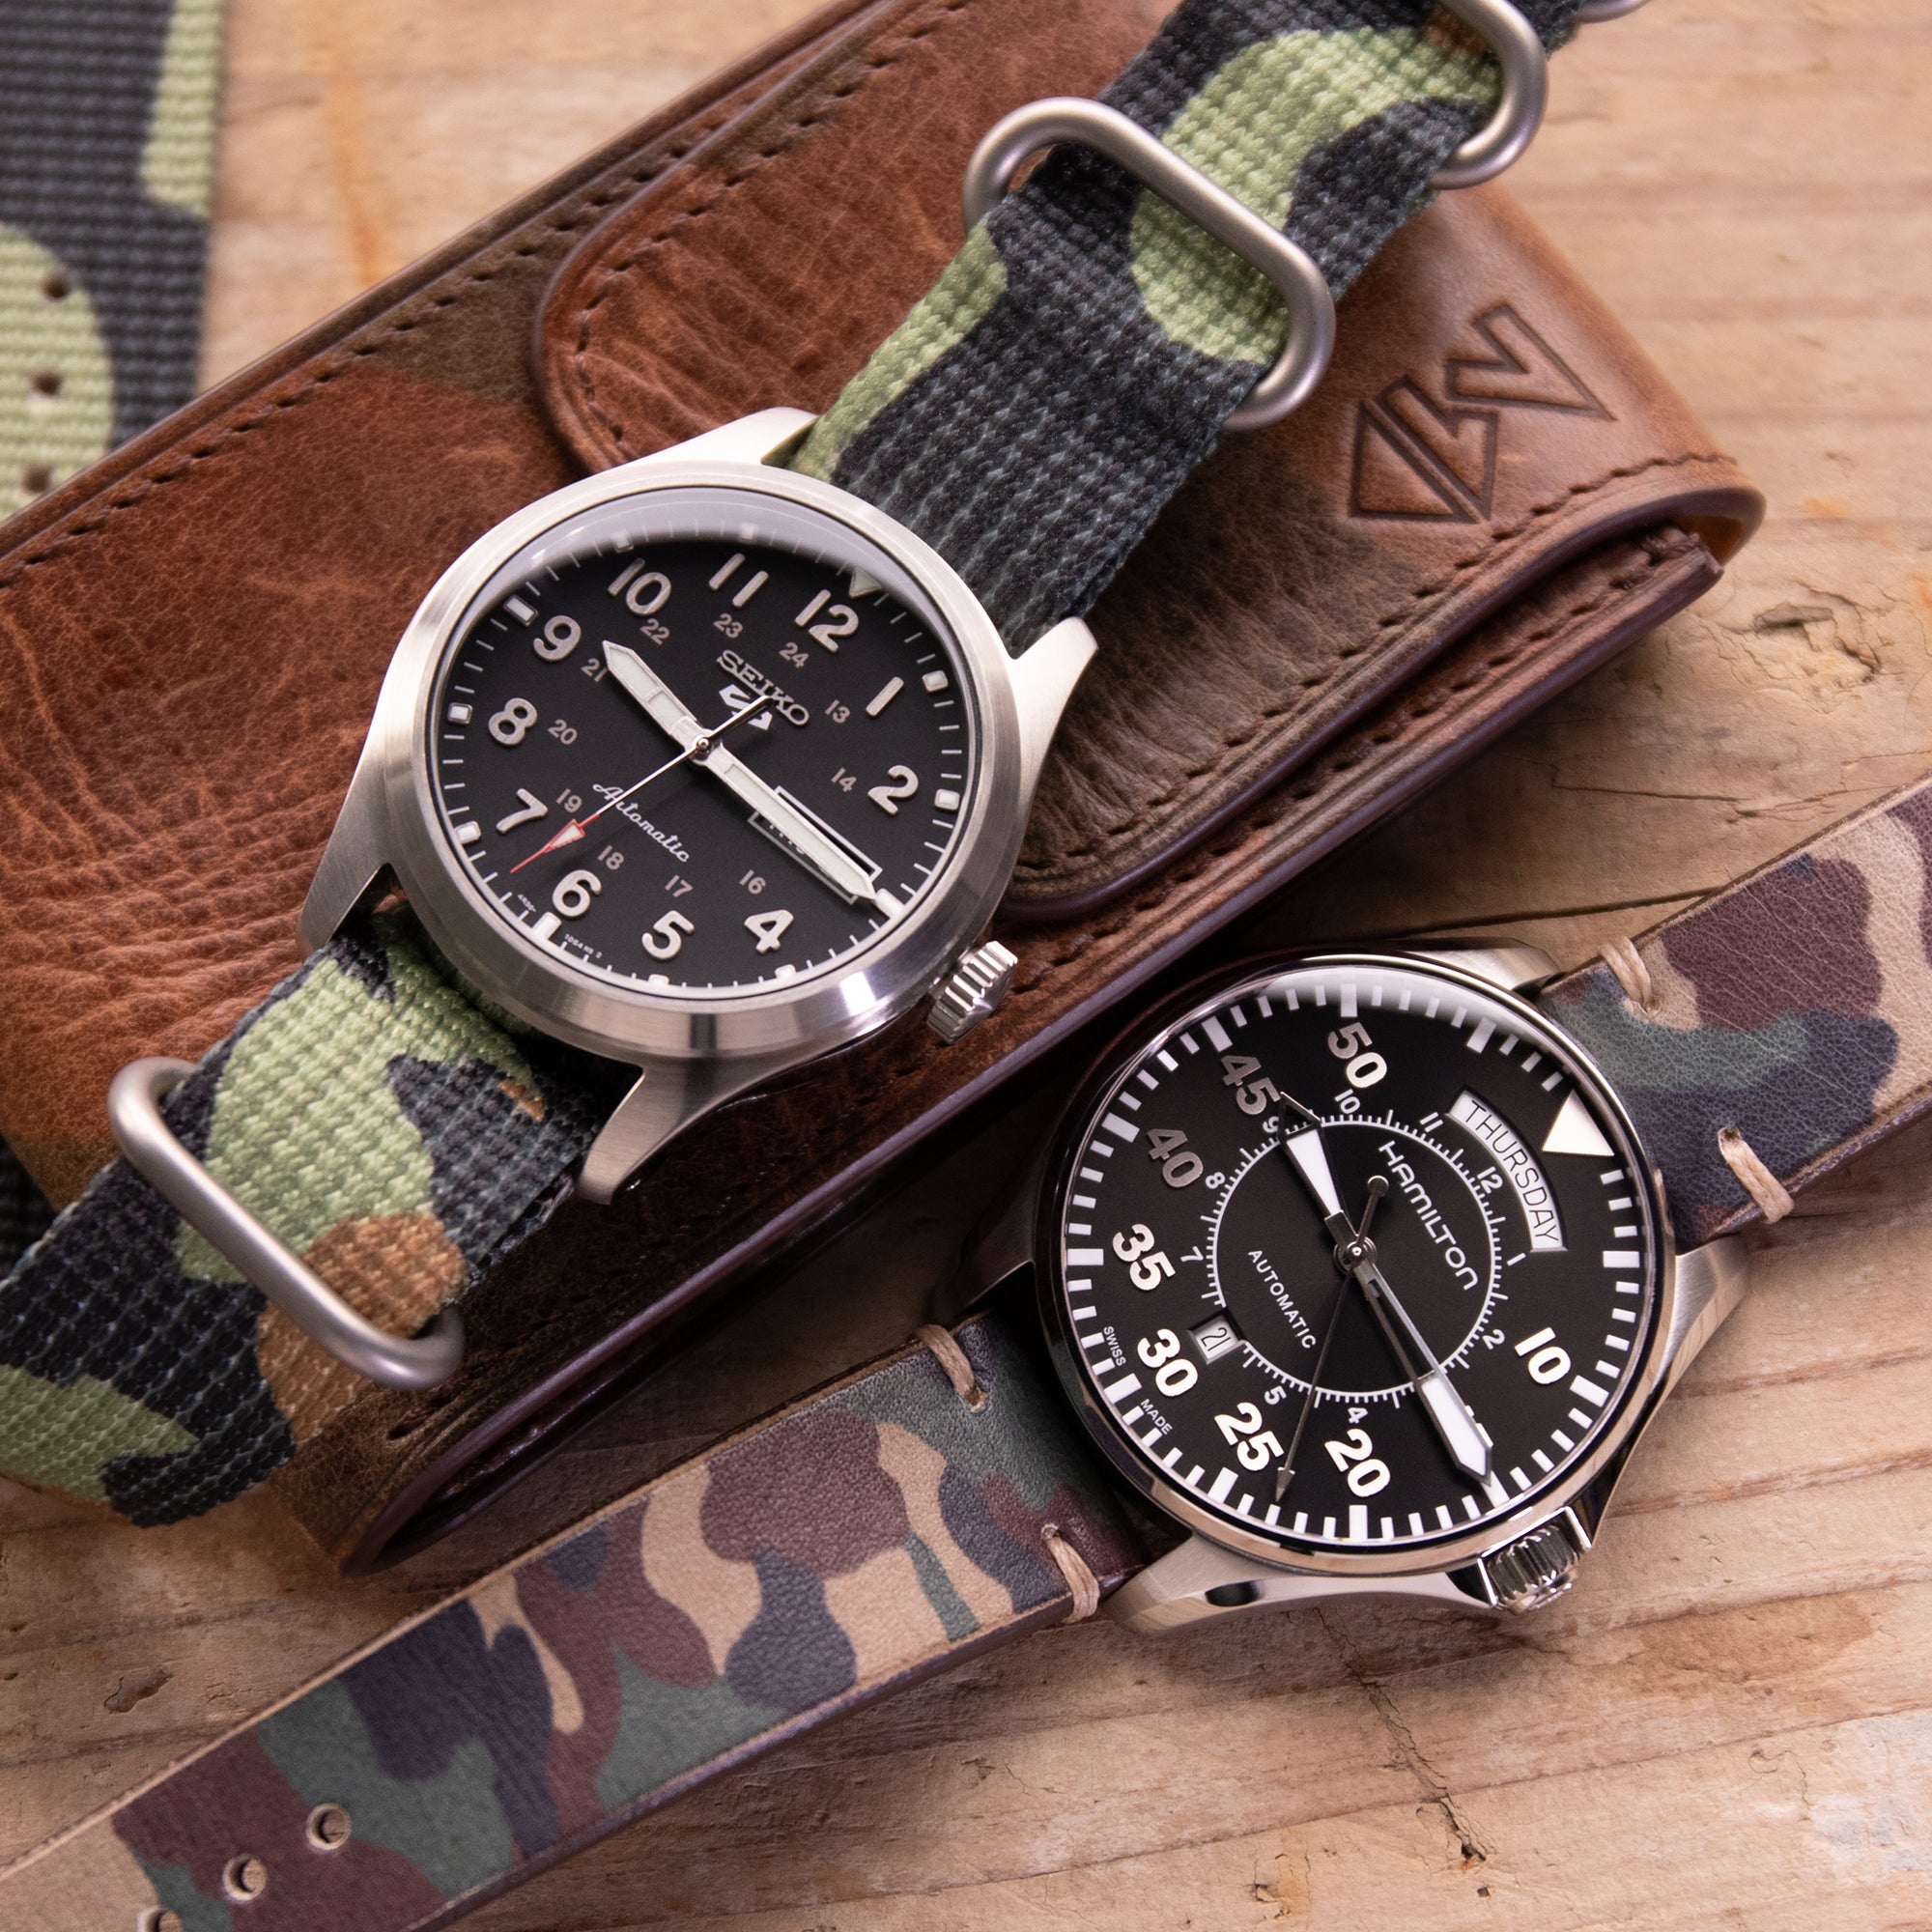 Seiko 5 Sports Field watch and Hamilton Khaki Field automatic paired Camo watch bands by Strapcode